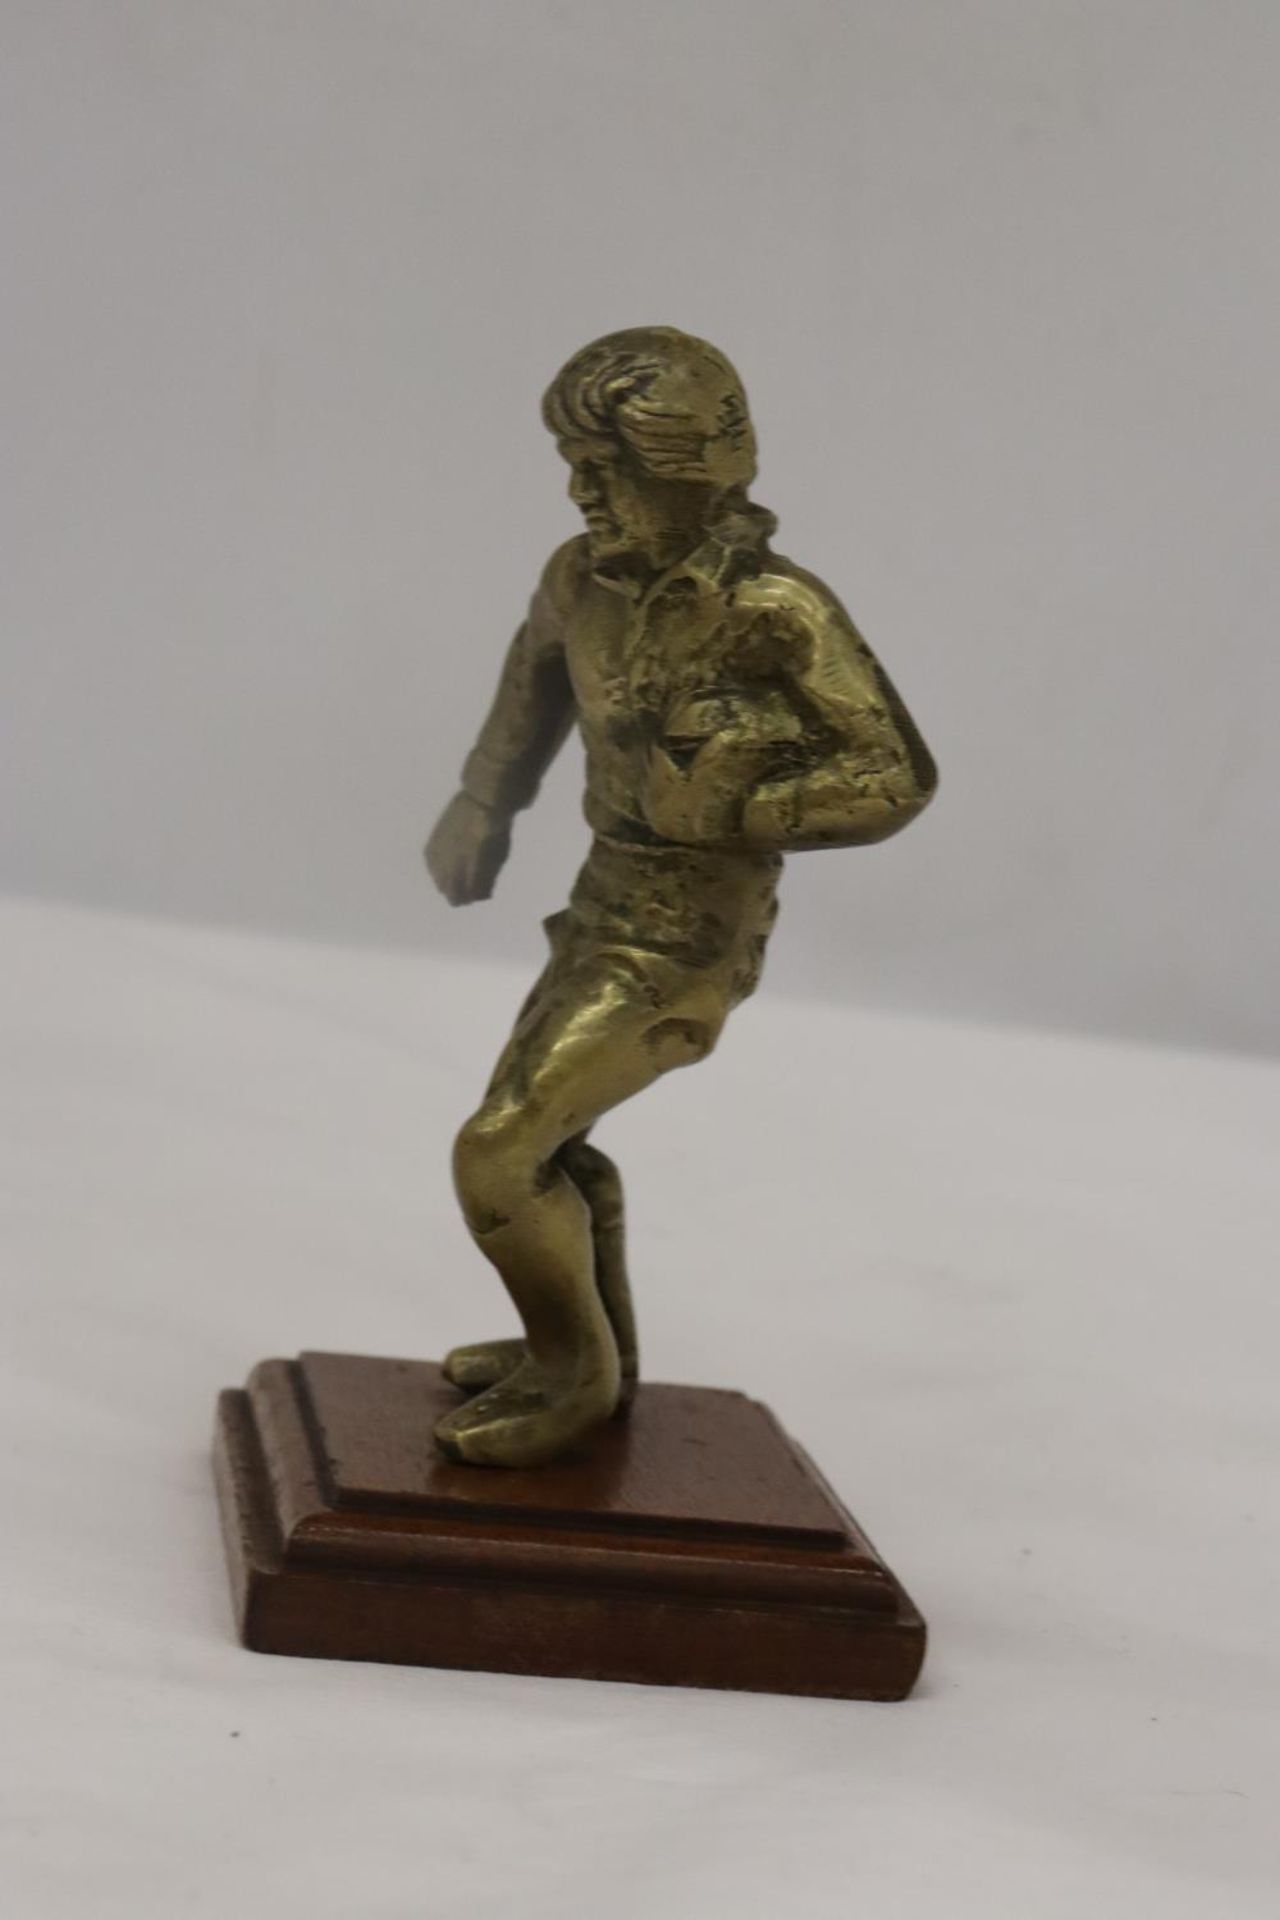 A VINTAGE BRASS RUGBY PLAYER ON A WOODEN PLINTH - Image 4 of 5